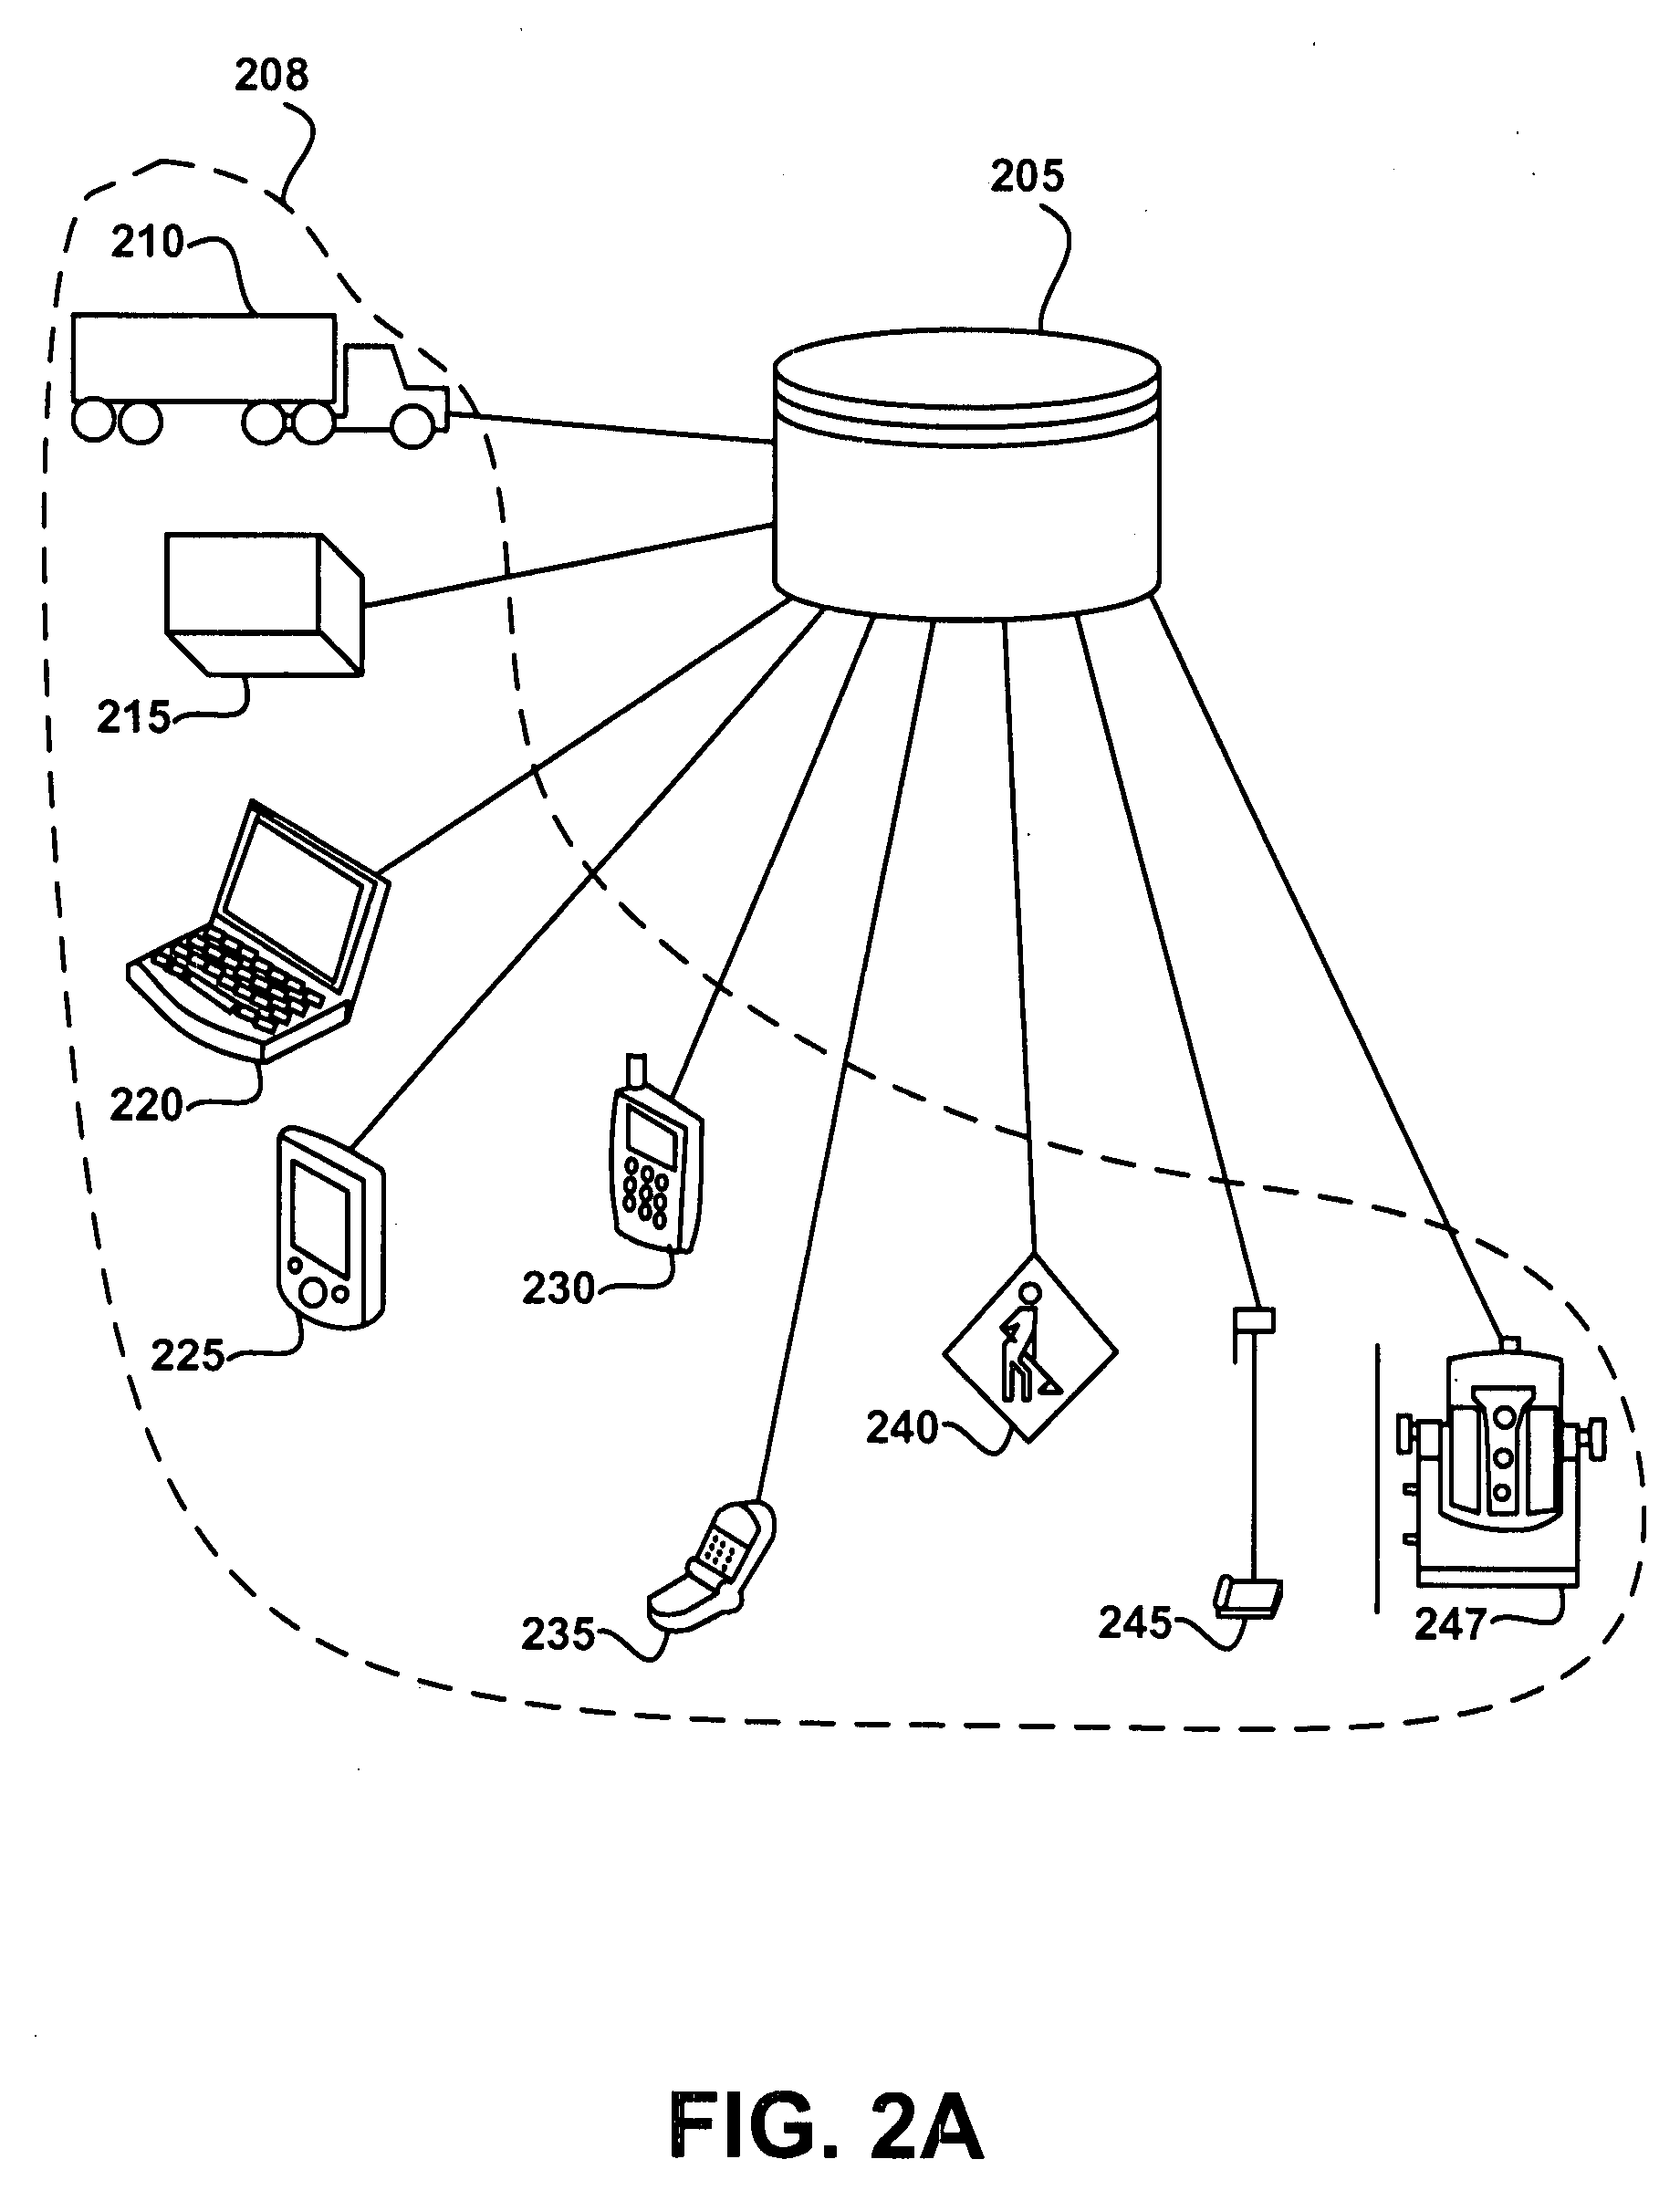 System and method for providing asset management information to a customer